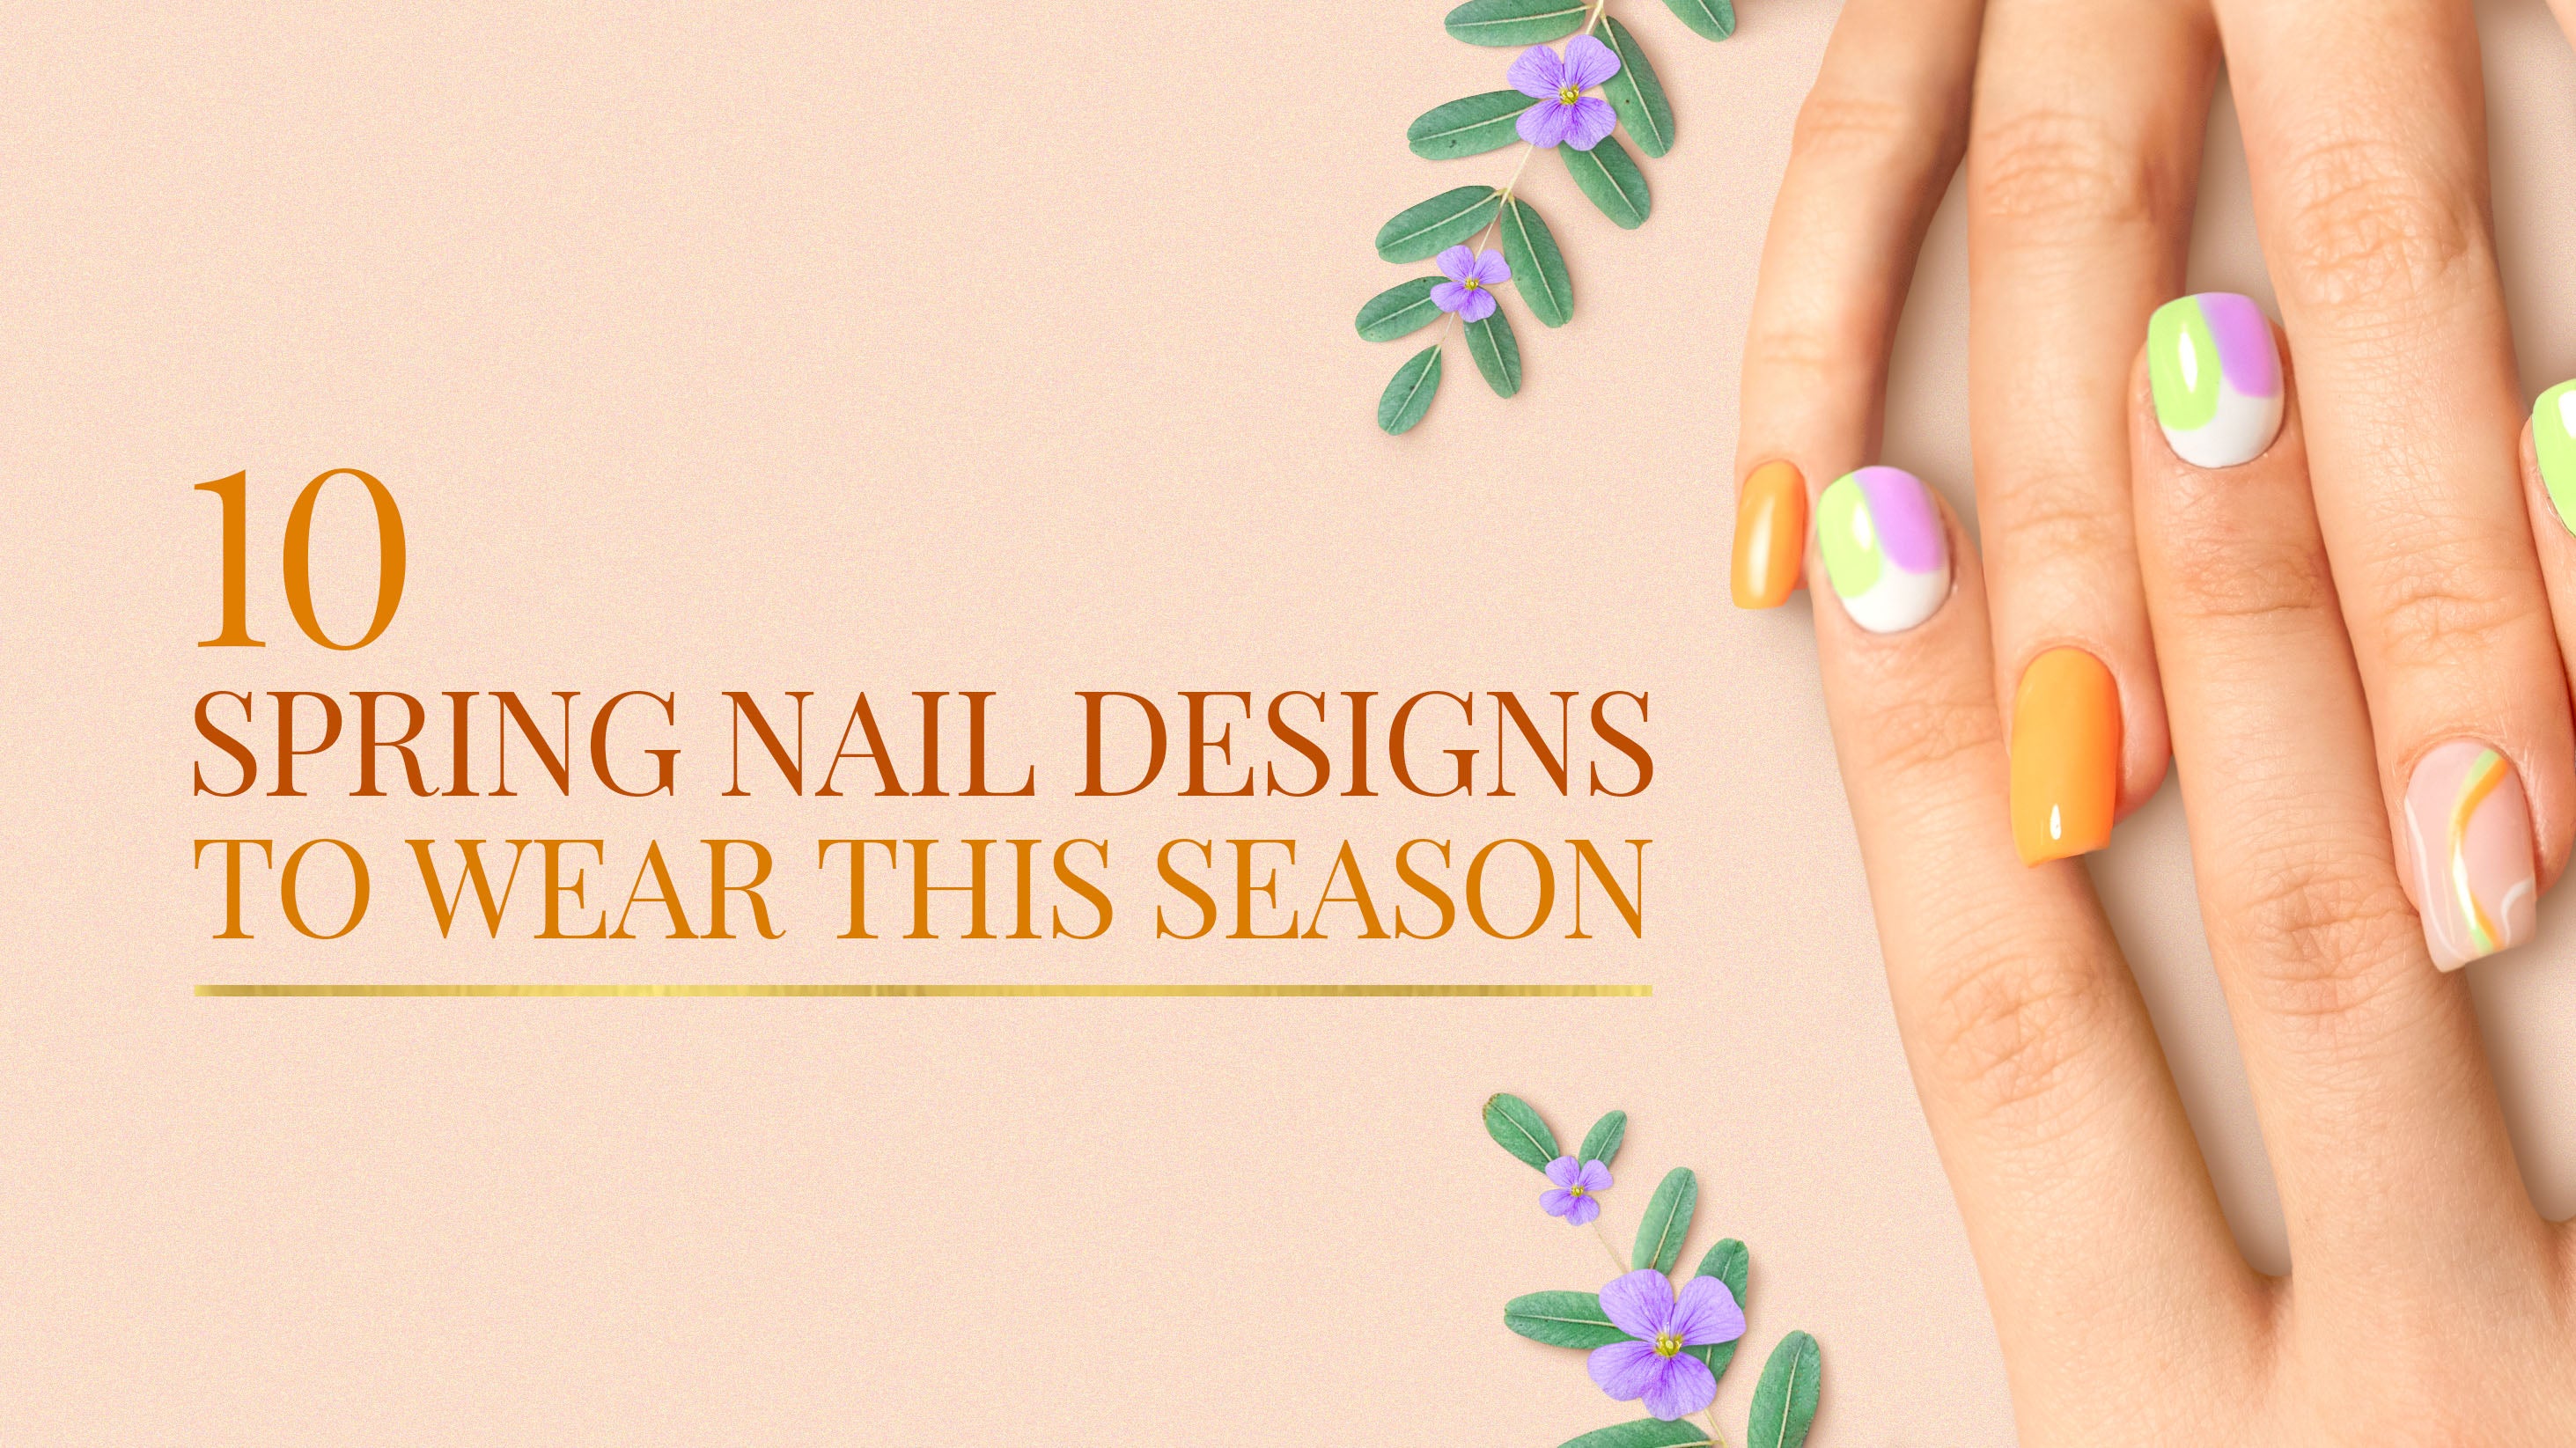 7. 10 Spring Nail Designs That Will Brighten Your Day - wide 6